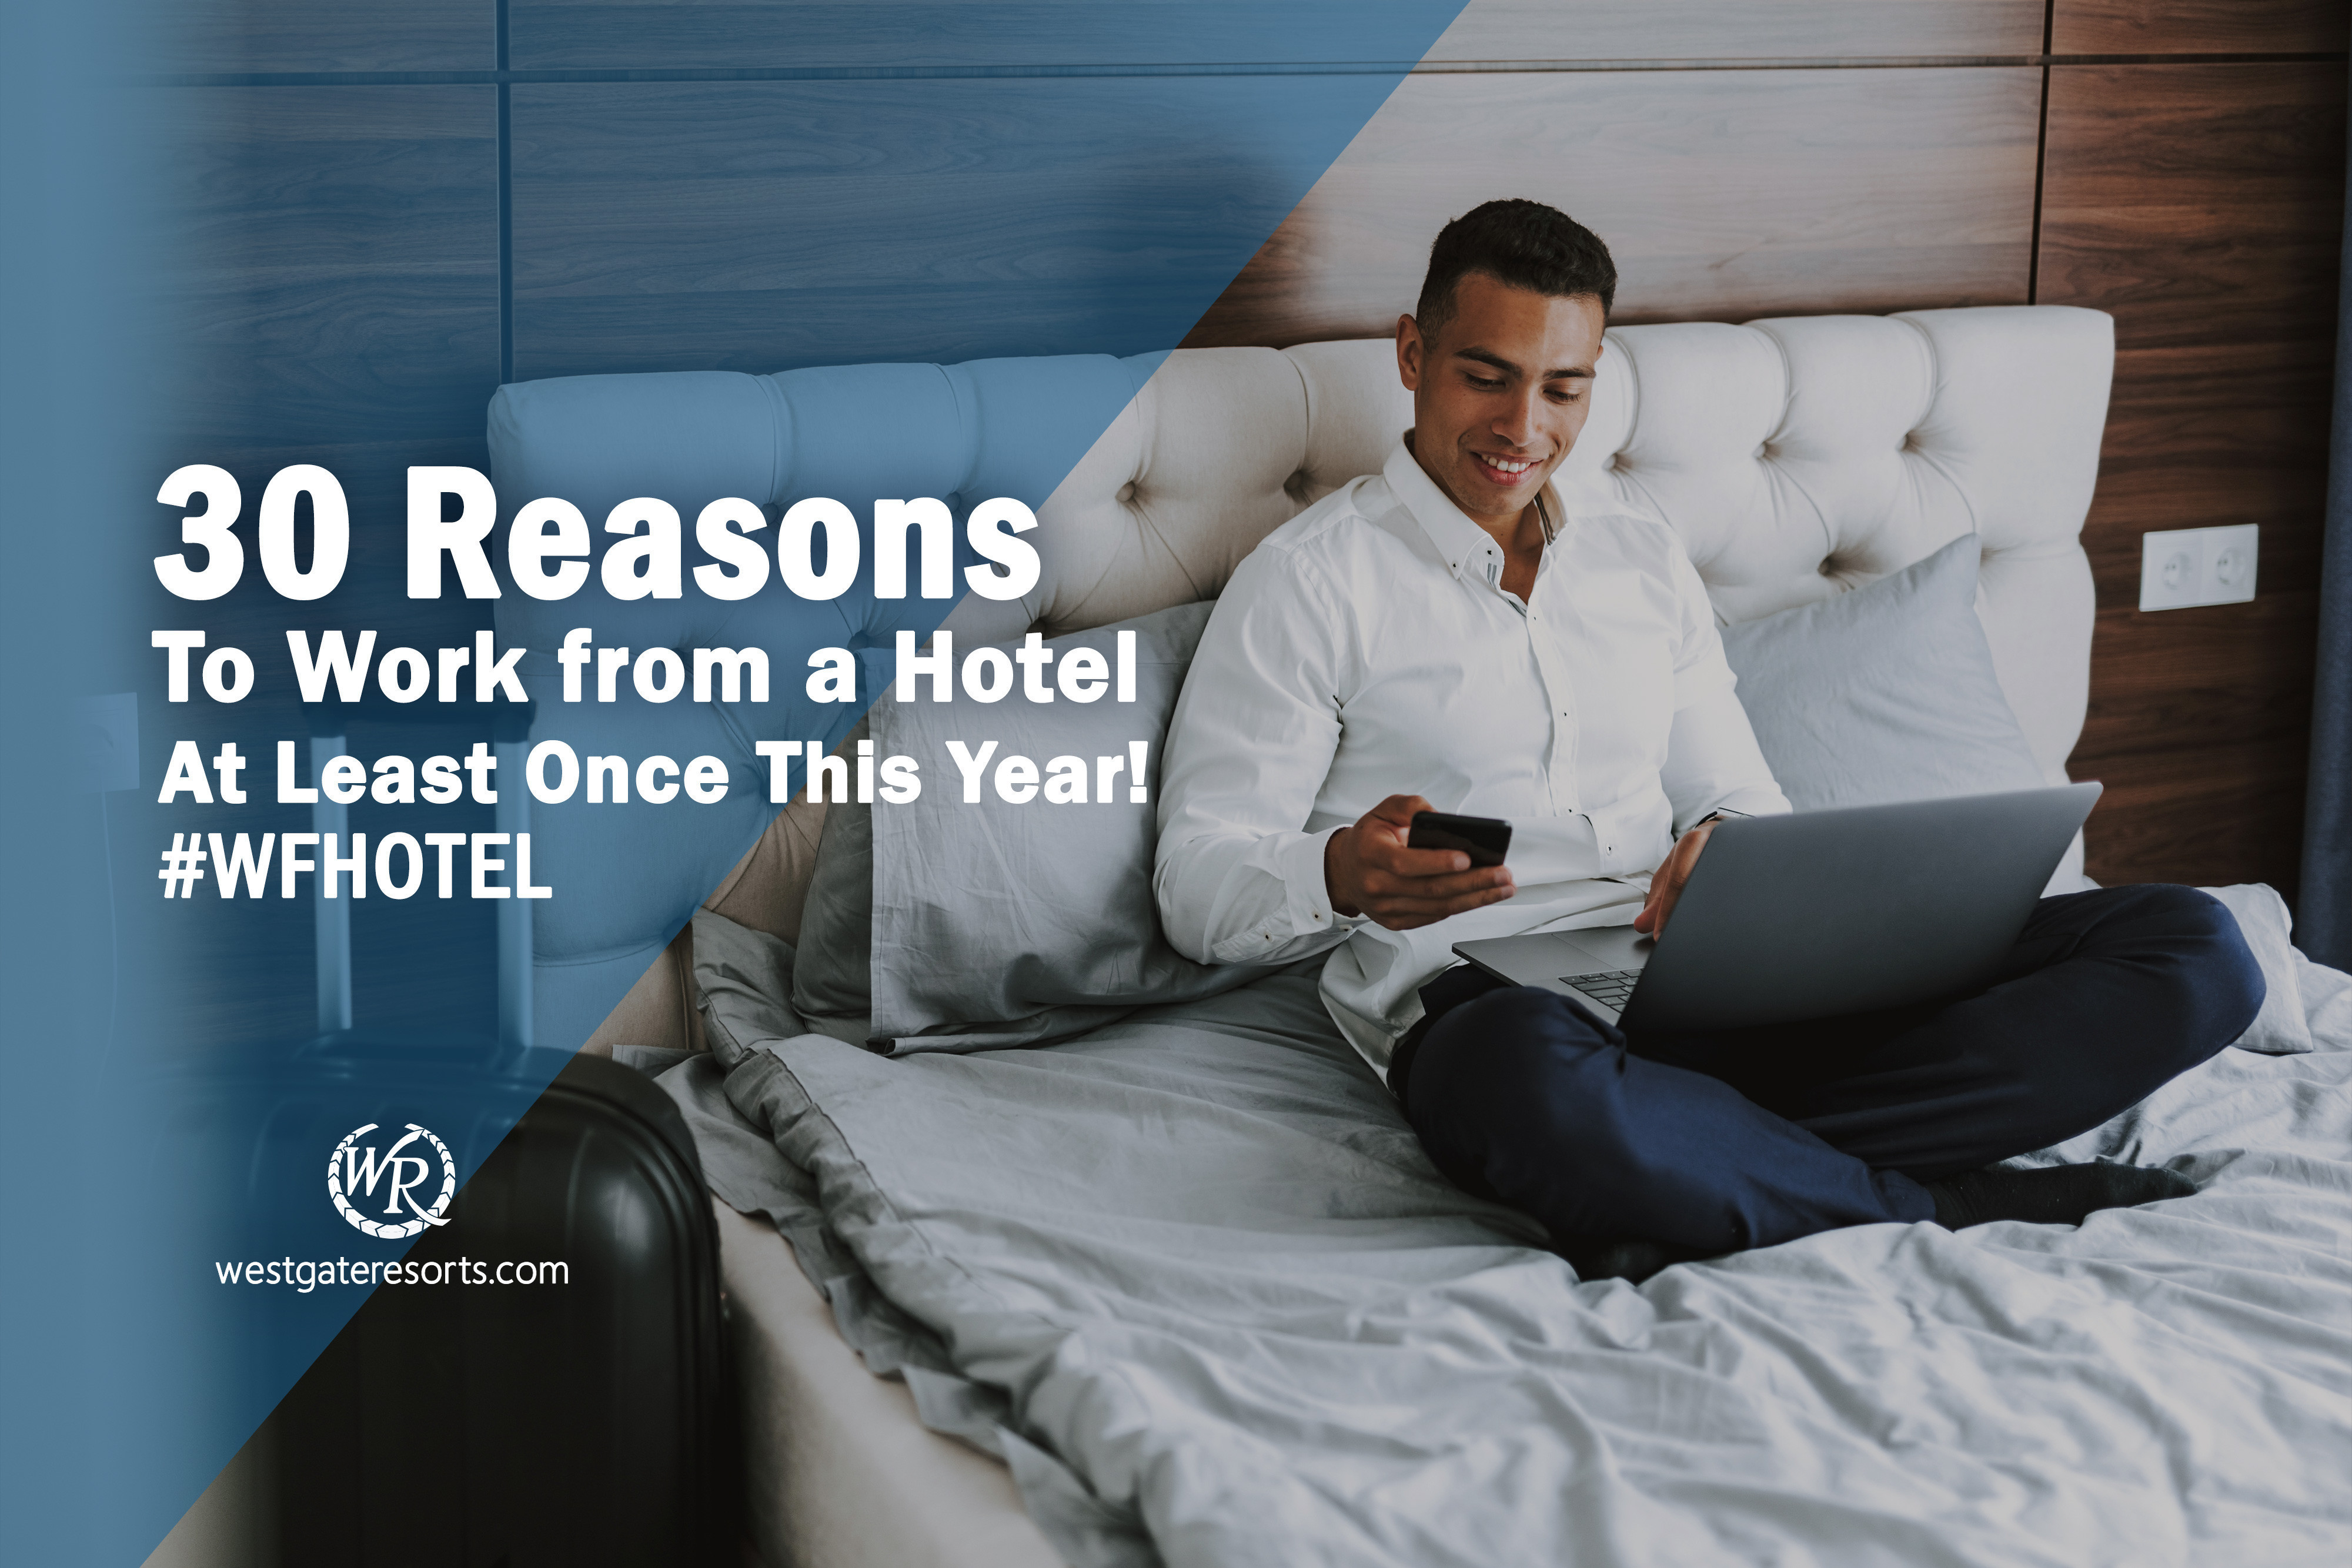 30 Reasons To Work From A Hotel At Least Once This Year! #WFHOTEL